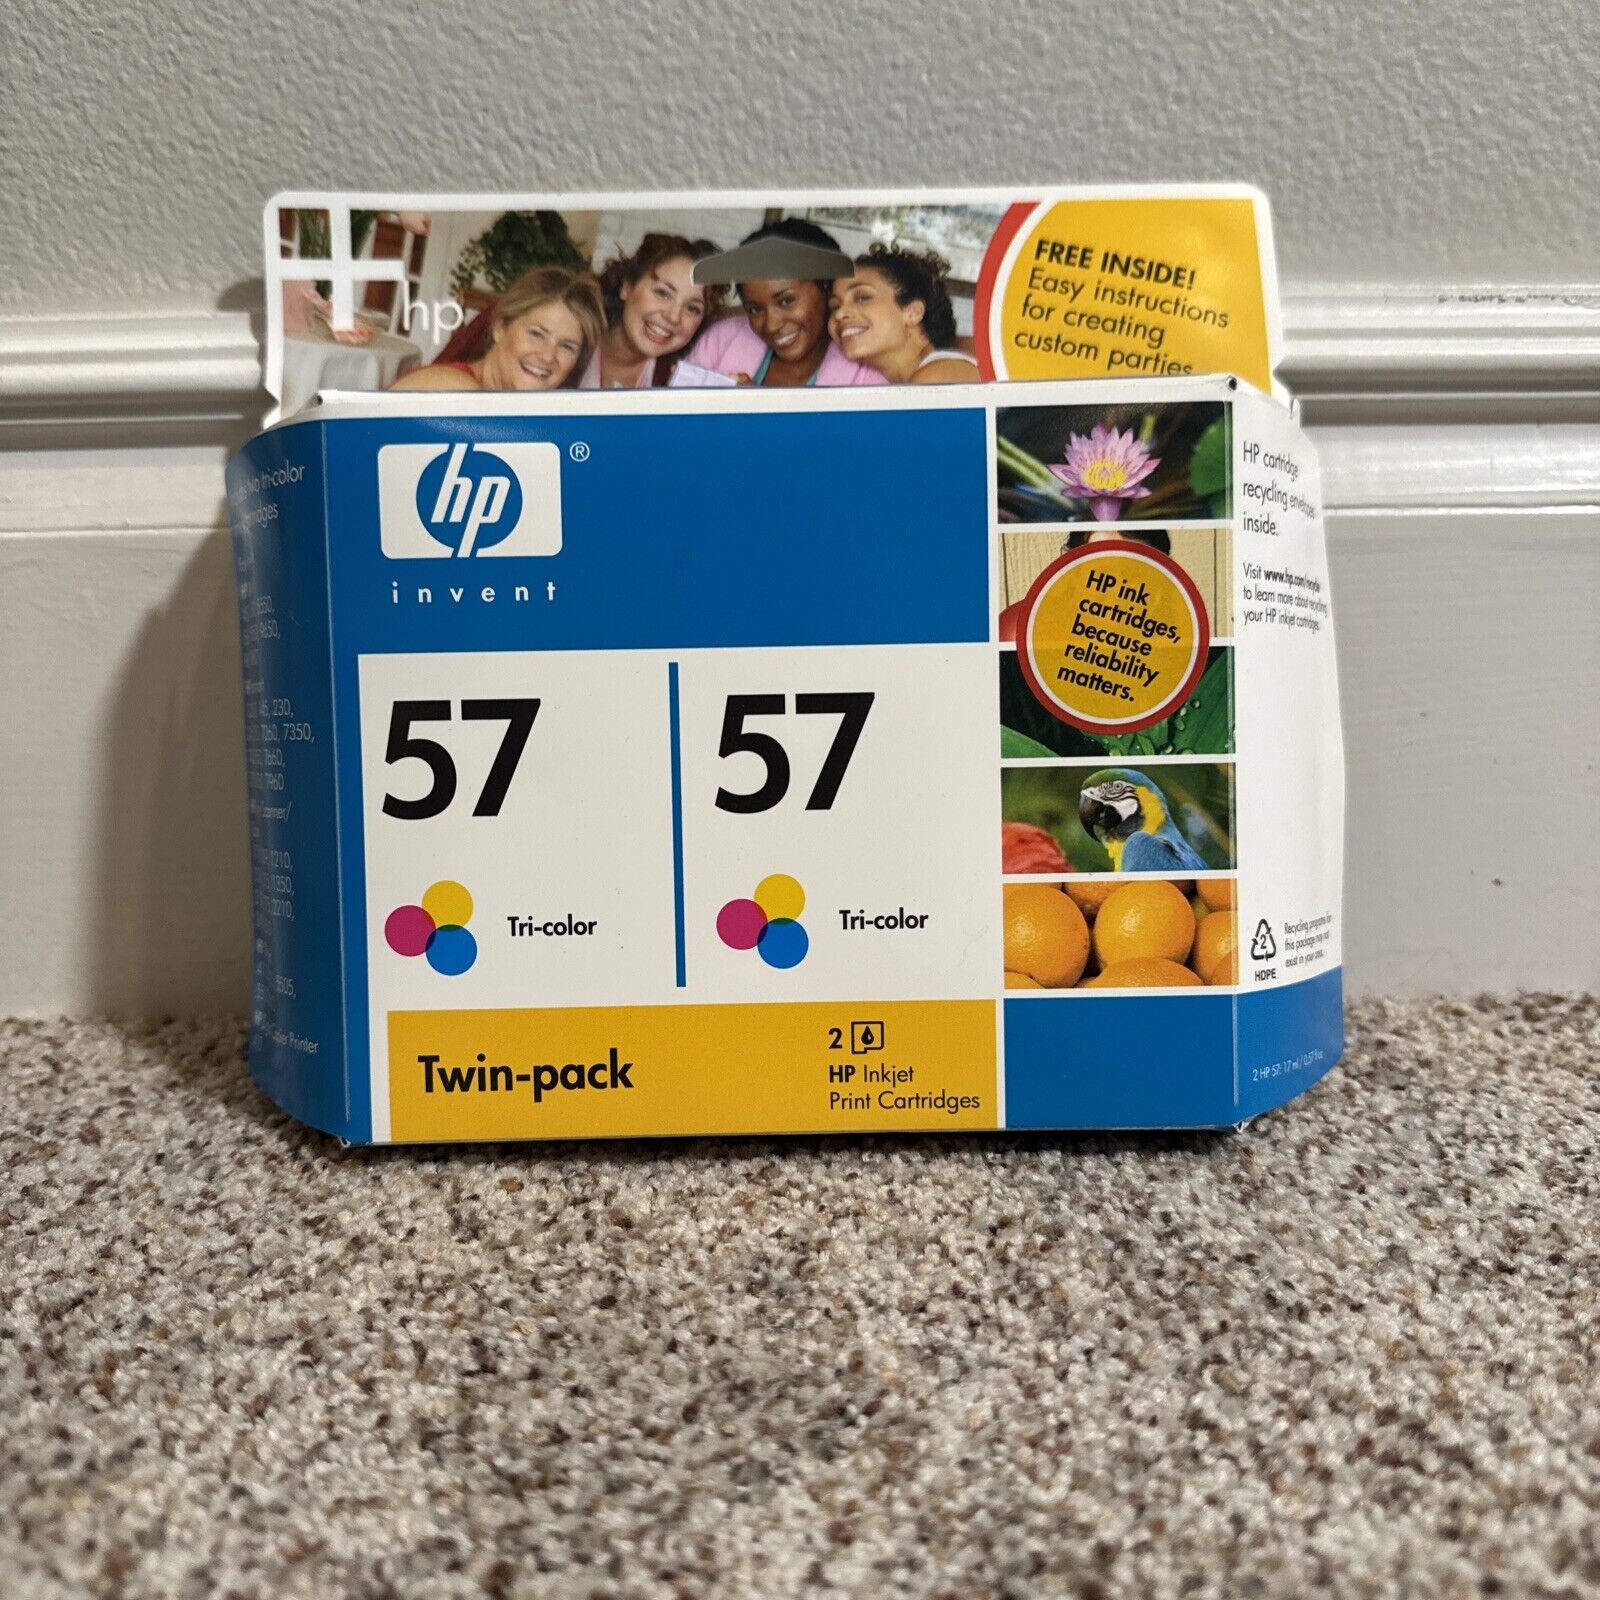 HP Invent Ink Cartridge 57 Tri-color Inkjet Print Twin-pack Expired